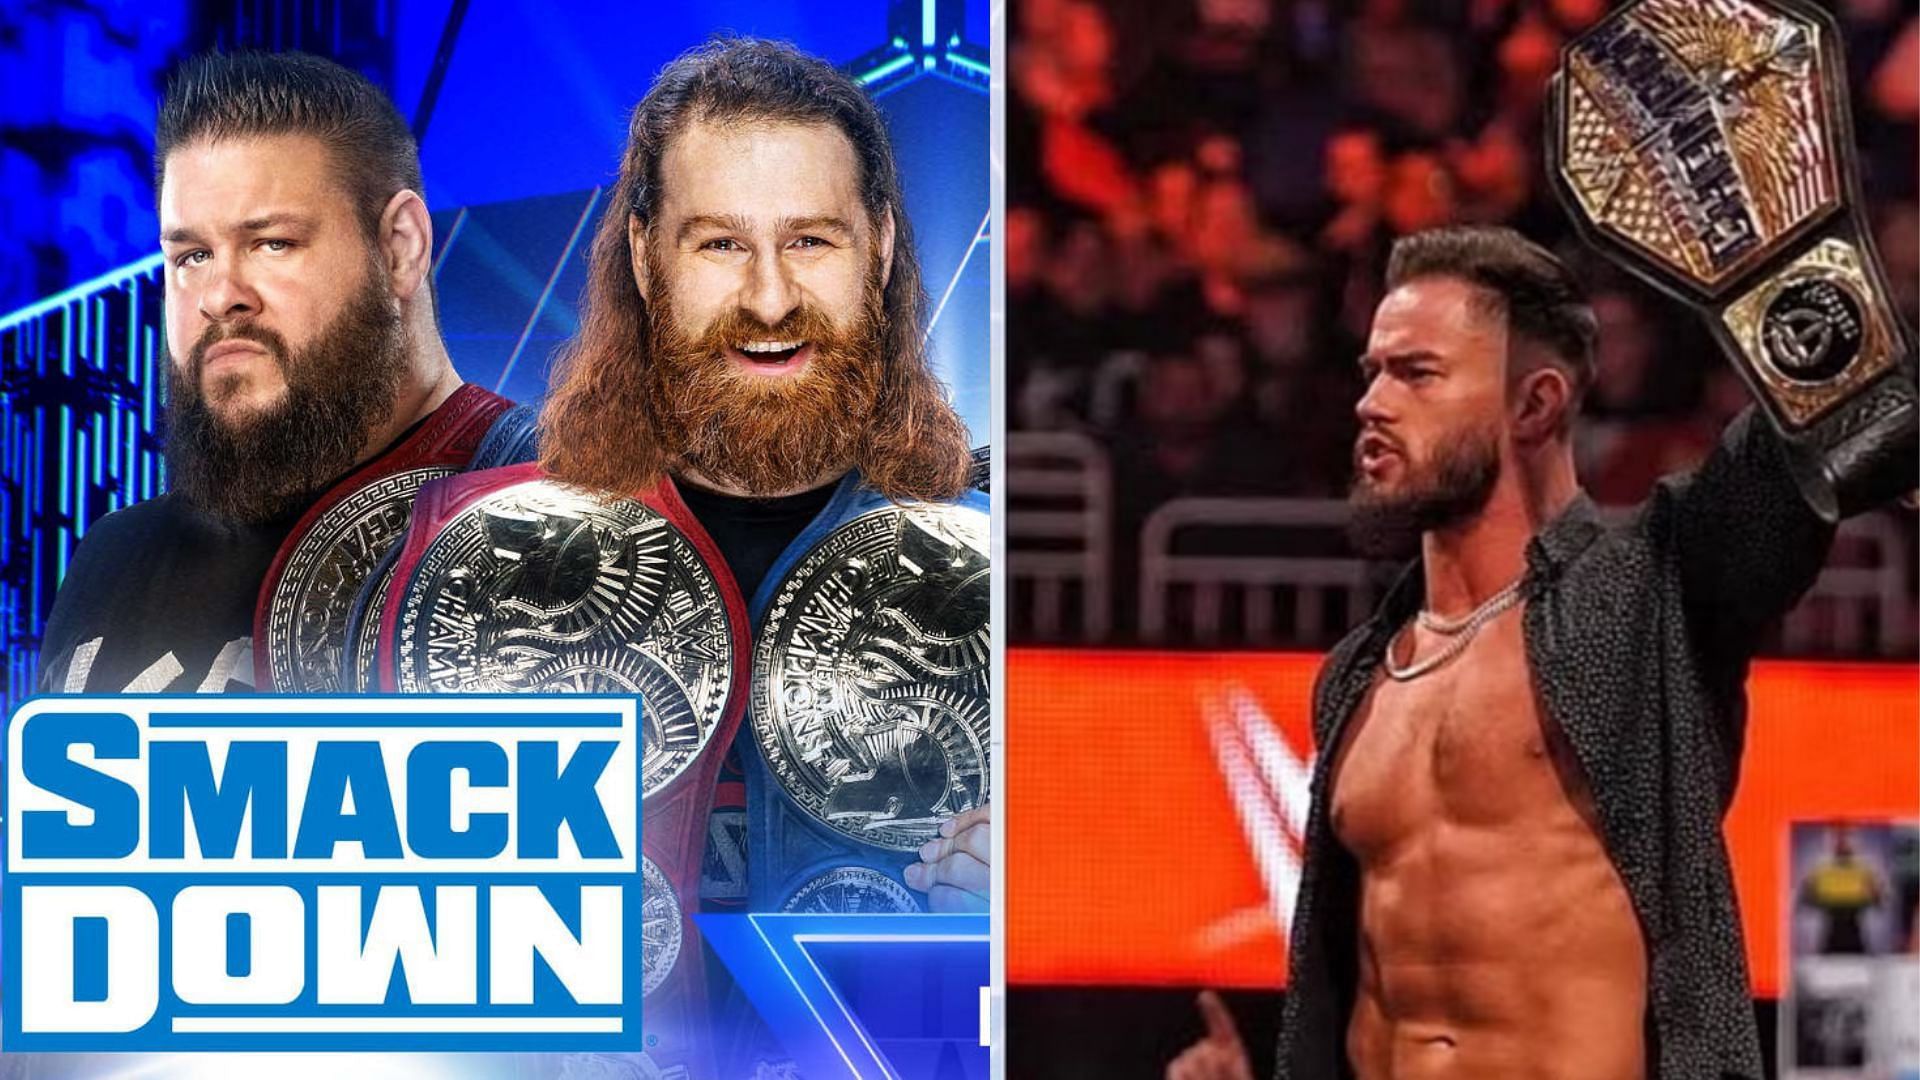 The upcoming WWE SmackDown show will feature four matches 